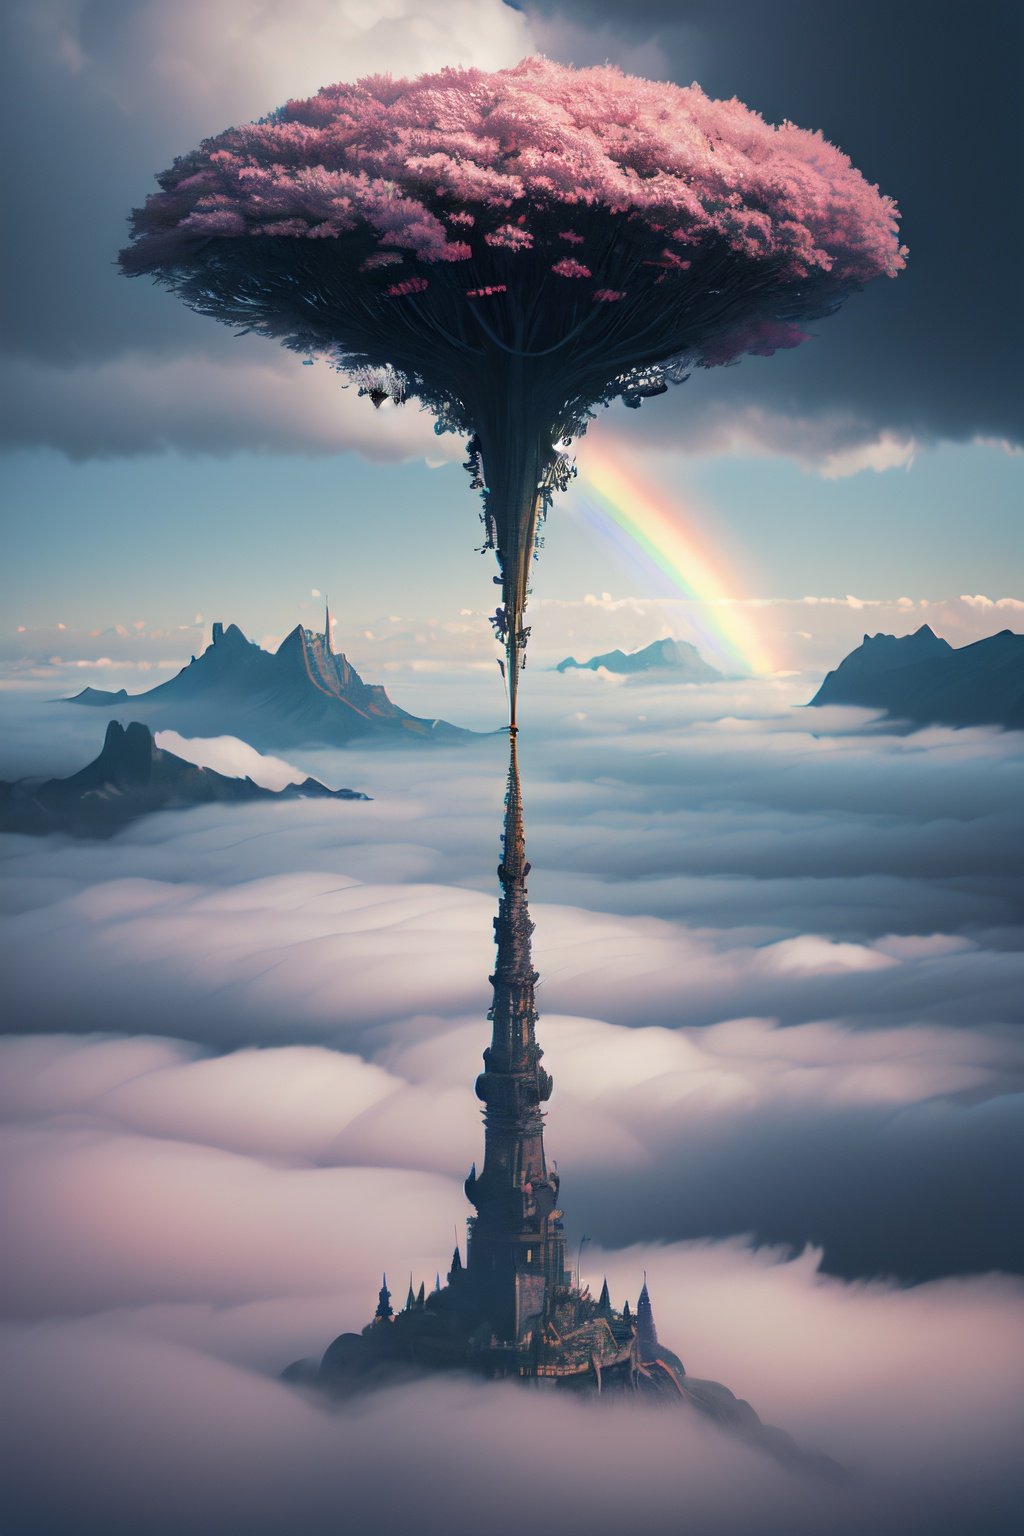 a surreal view of clouds, by Tom Froud, surreal art contest winner, dreamlike, pink clouds, rainbow skies, fluffy, abstract clouds, fantasy, dreamworld, surreal landscapes, cloud castles, floating gardens, impossible structures, secret gardens, a journey through a dream, enchanted skies, mysterious beauty, mythical